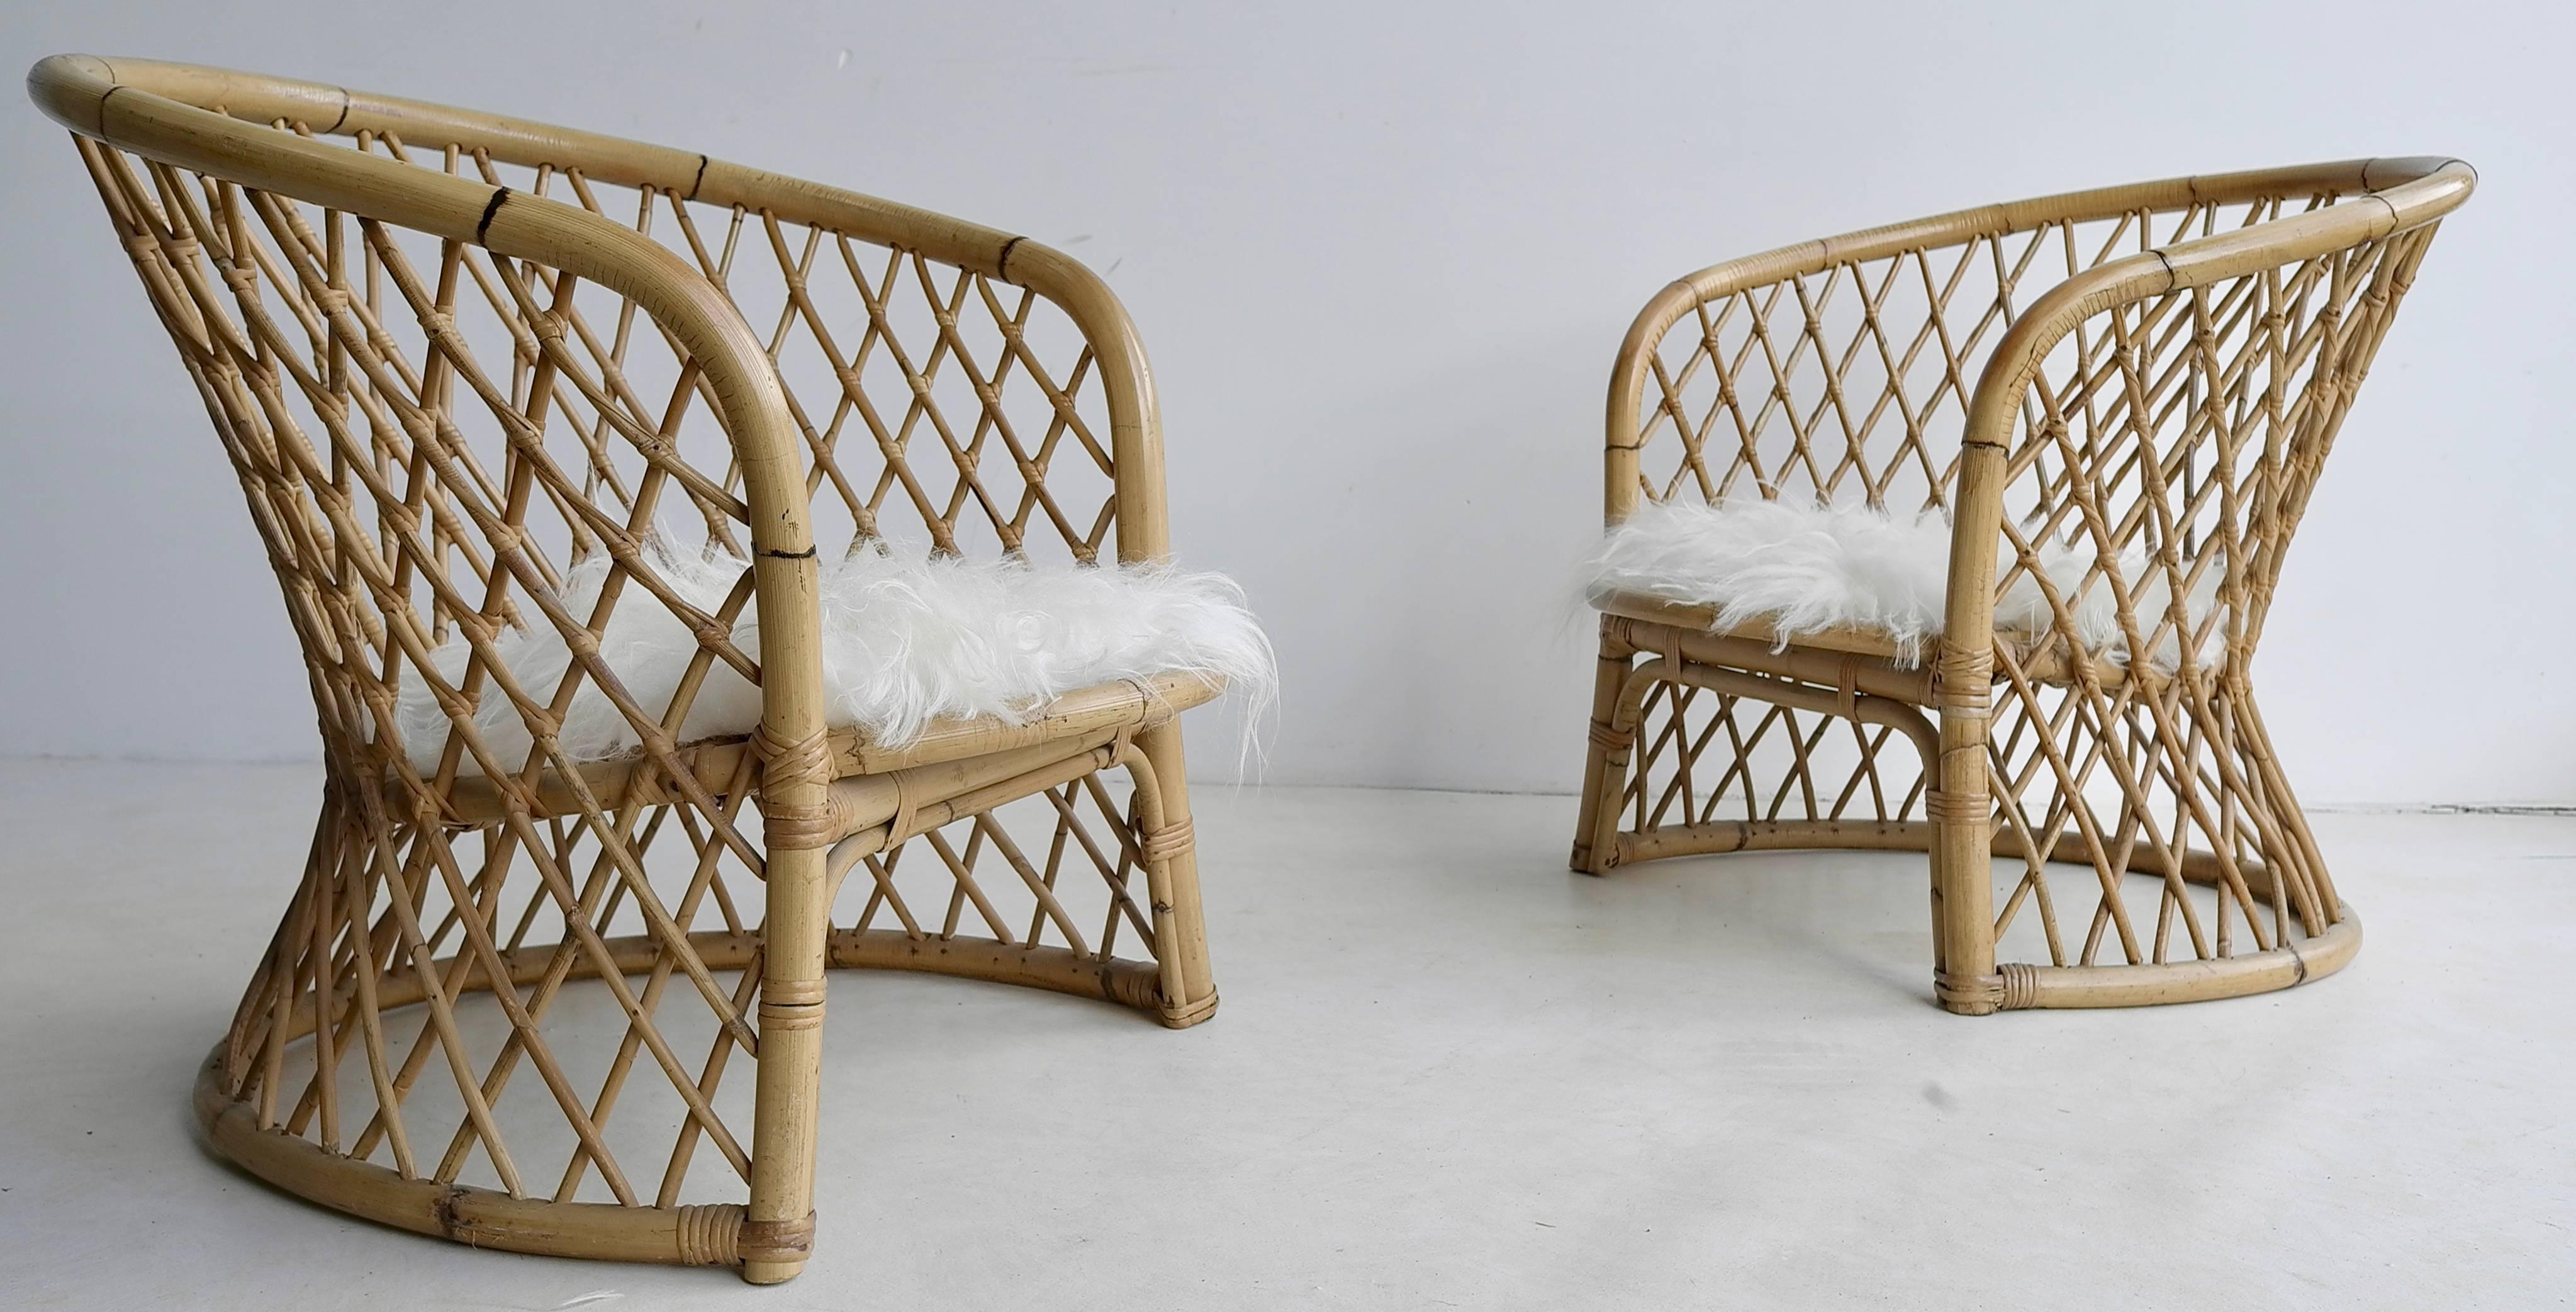 Pair of bamboo armchairs with woollen seats, 1960s

These chairs would look great inside an interior or outside on a porch.